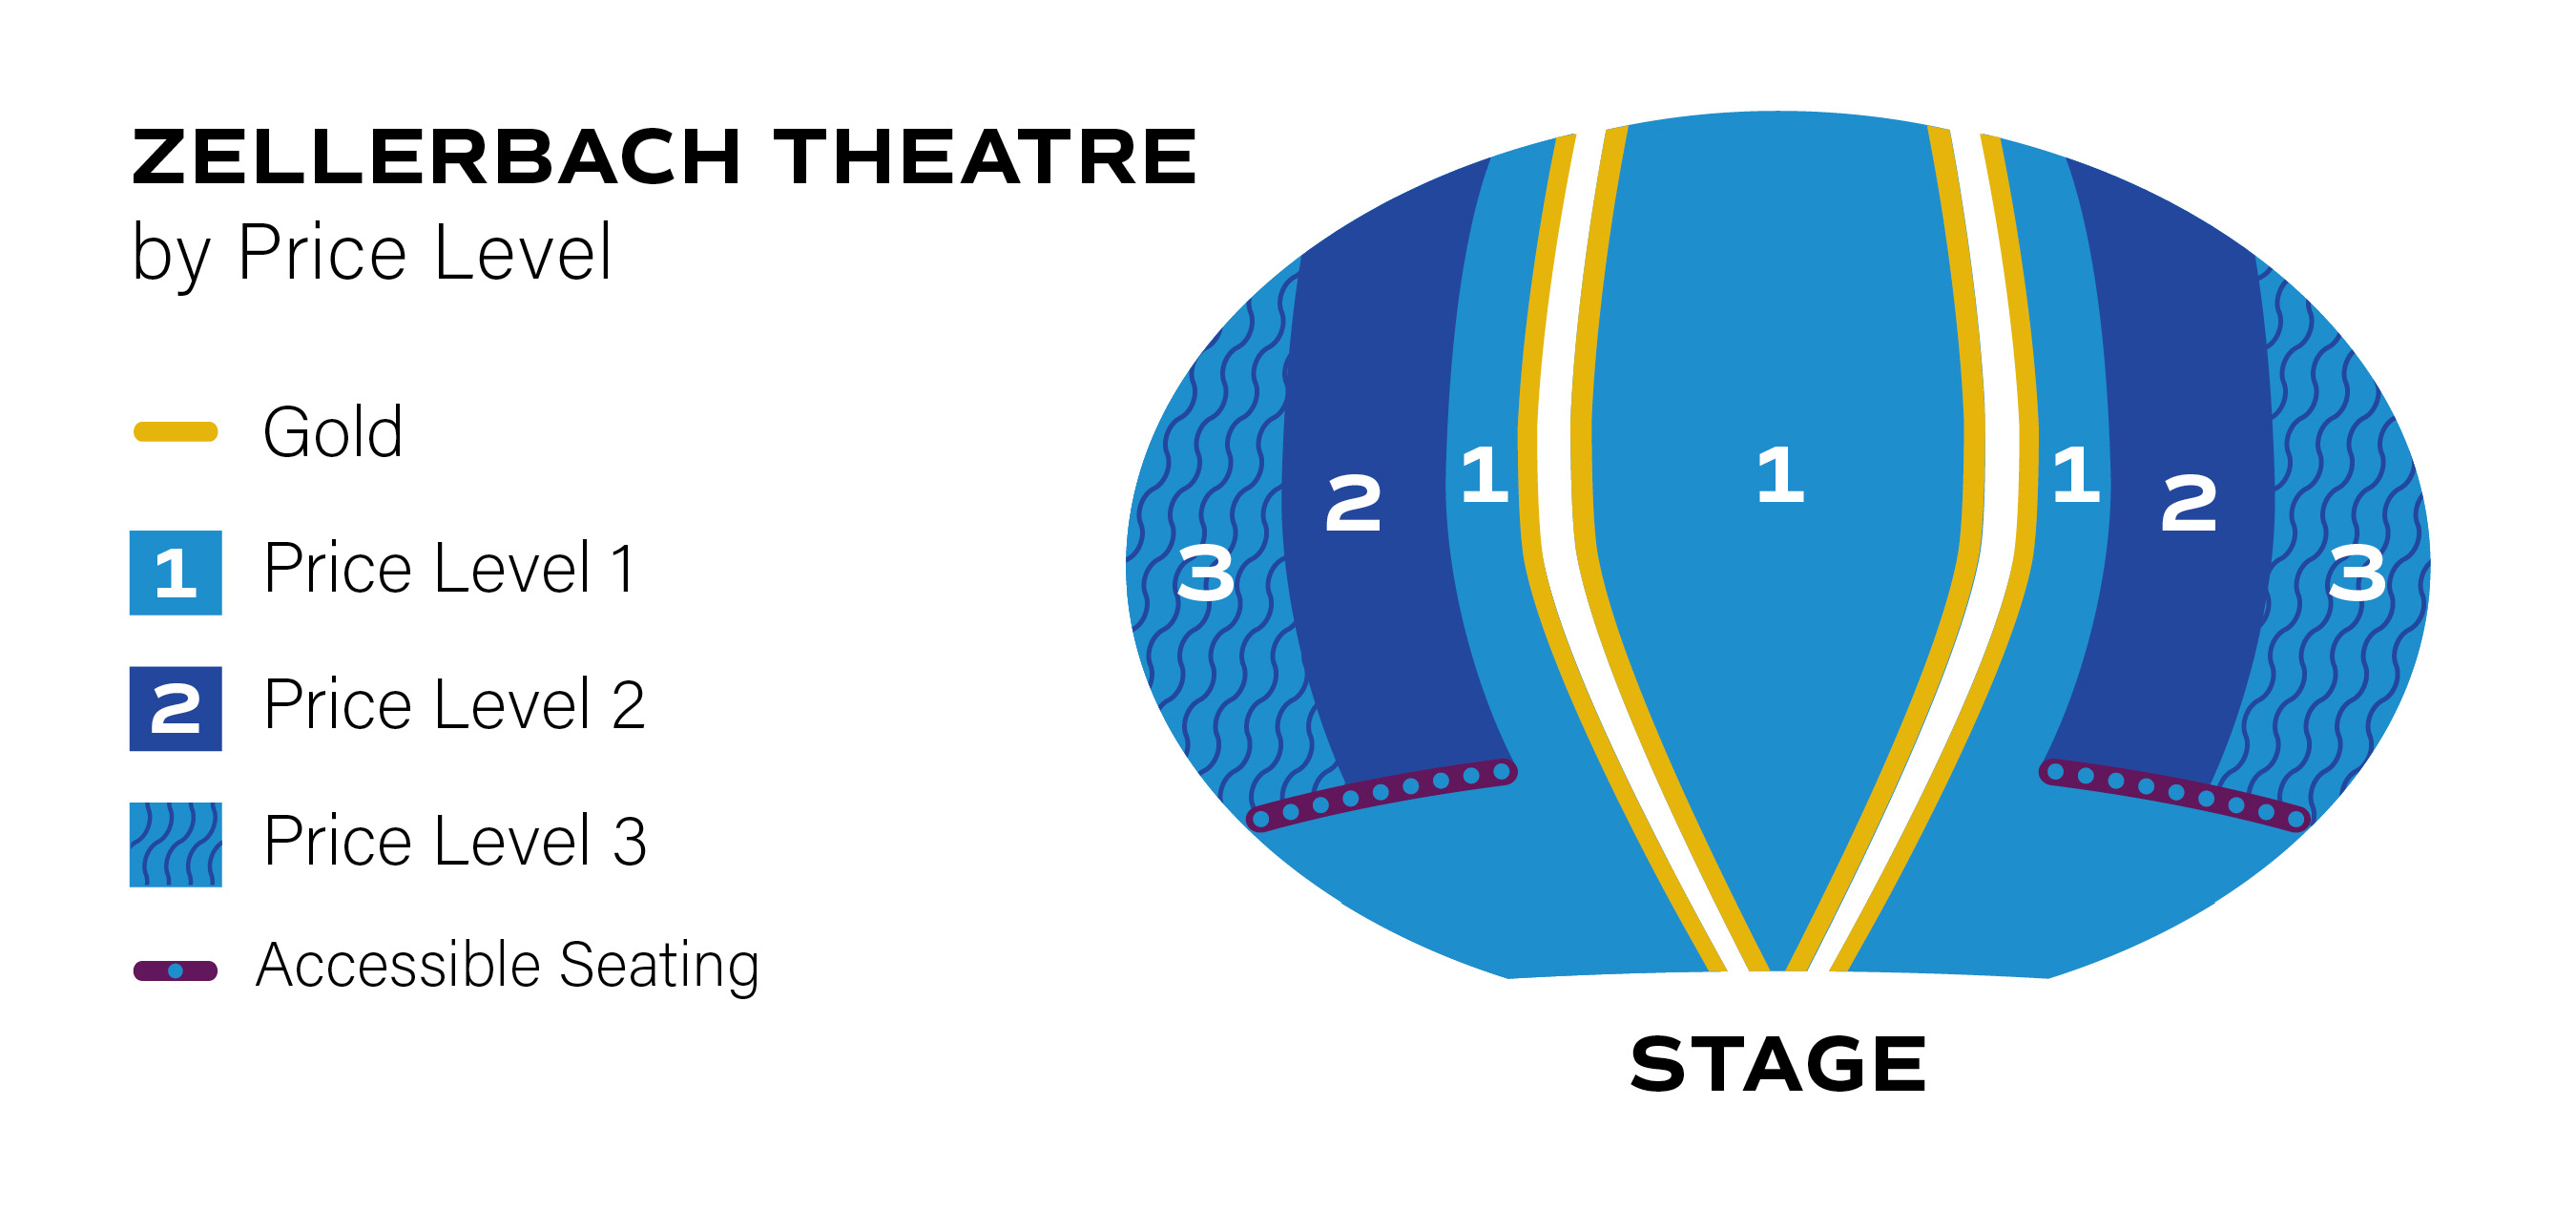 Zellerbach Theatre Seat Map by Price Level